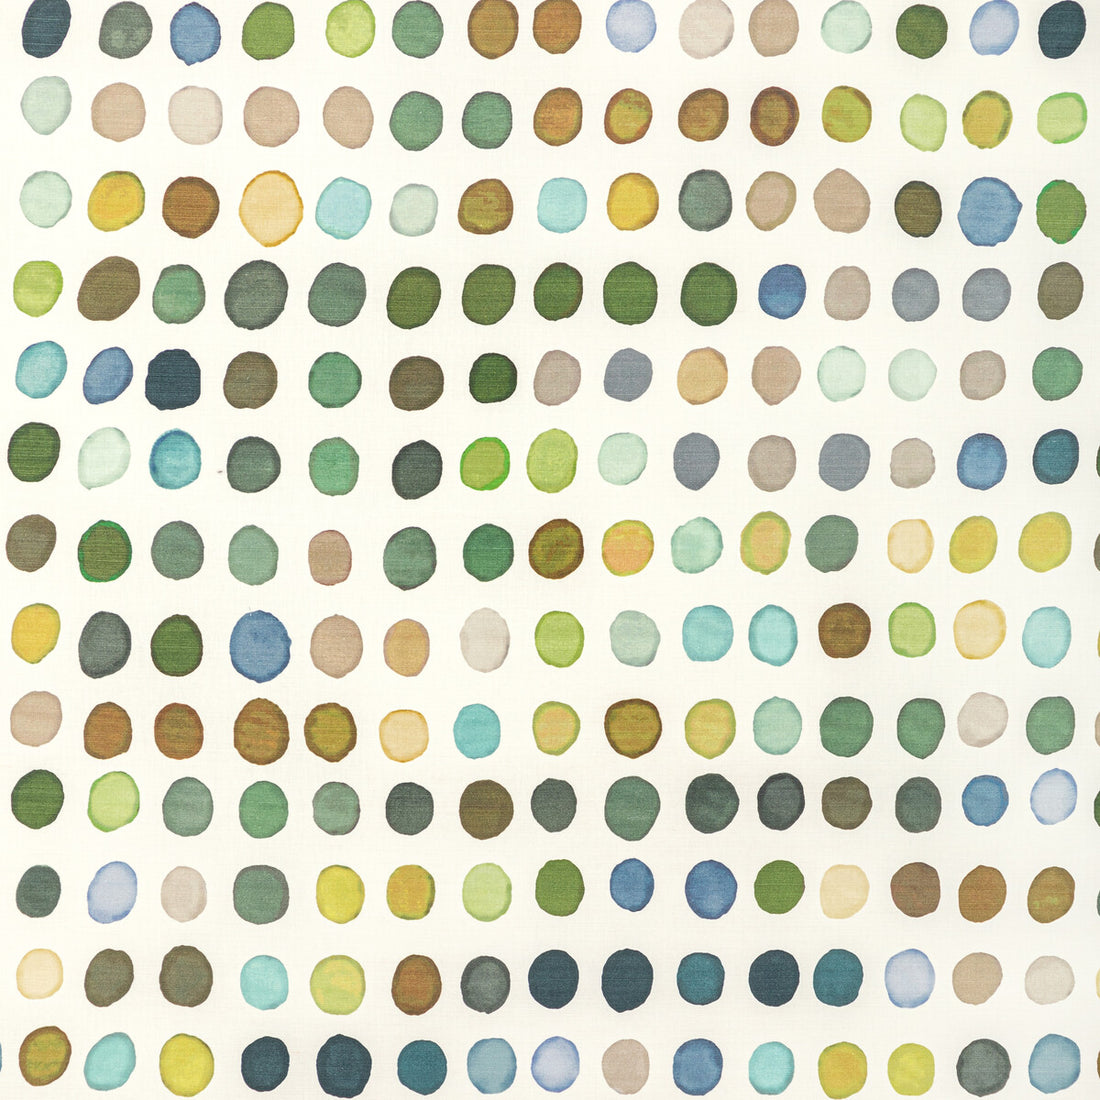 Twister Print fabric in kiwi/slate color - pattern GWF-2735.352.0 - by Lee Jofa Modern in the Rhapsody collection